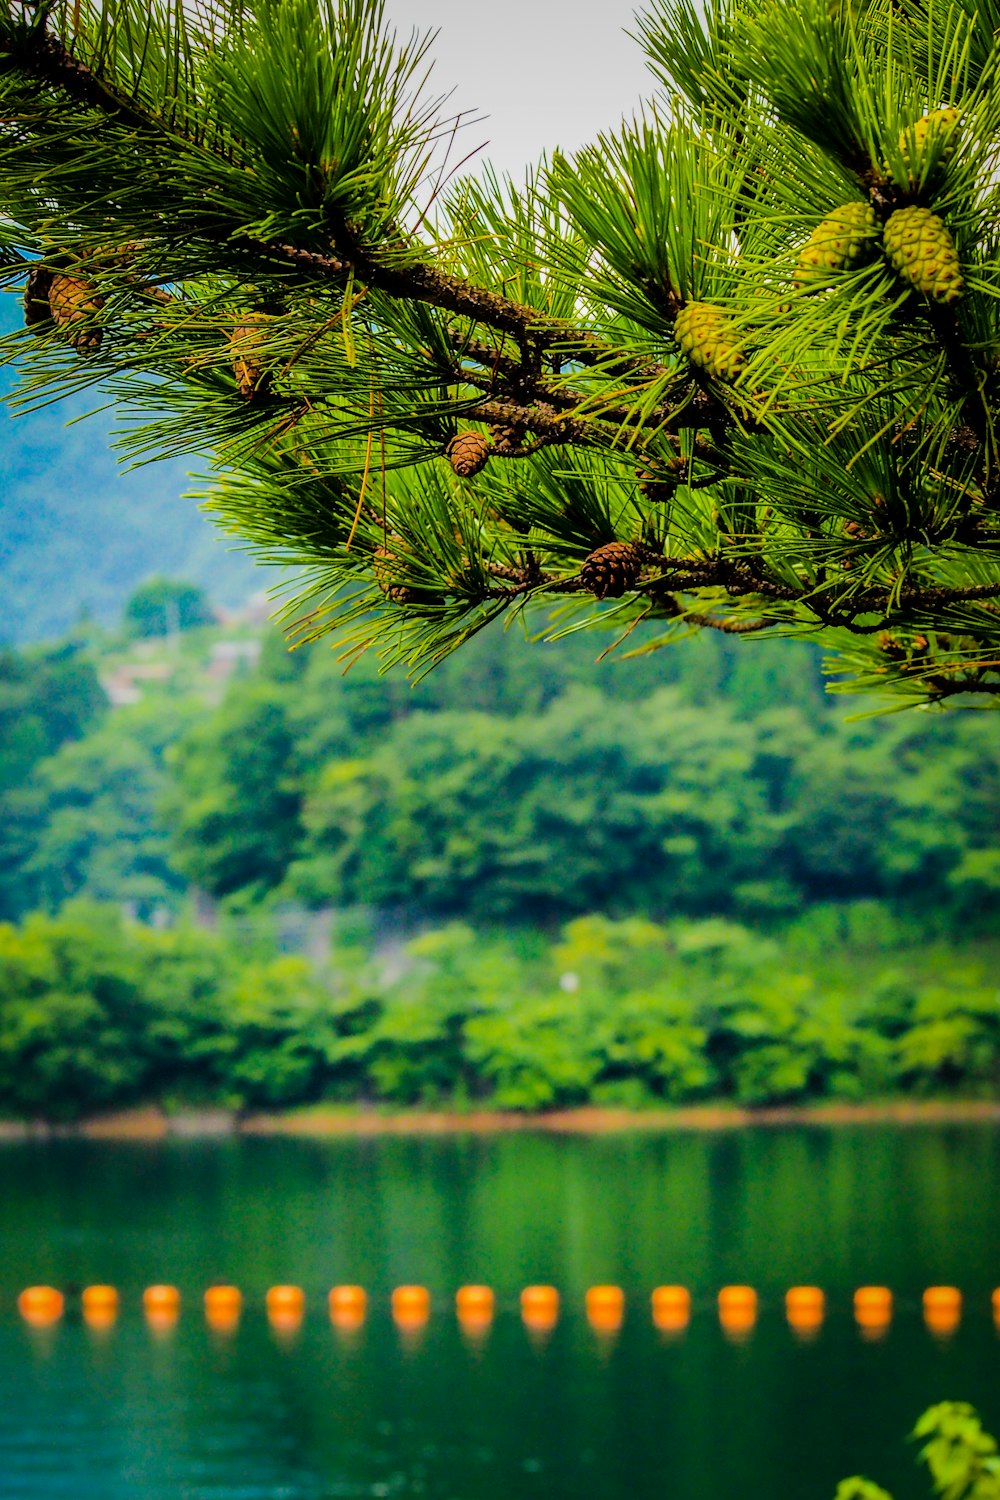 a bird perched on top of a pine tree next to a lake